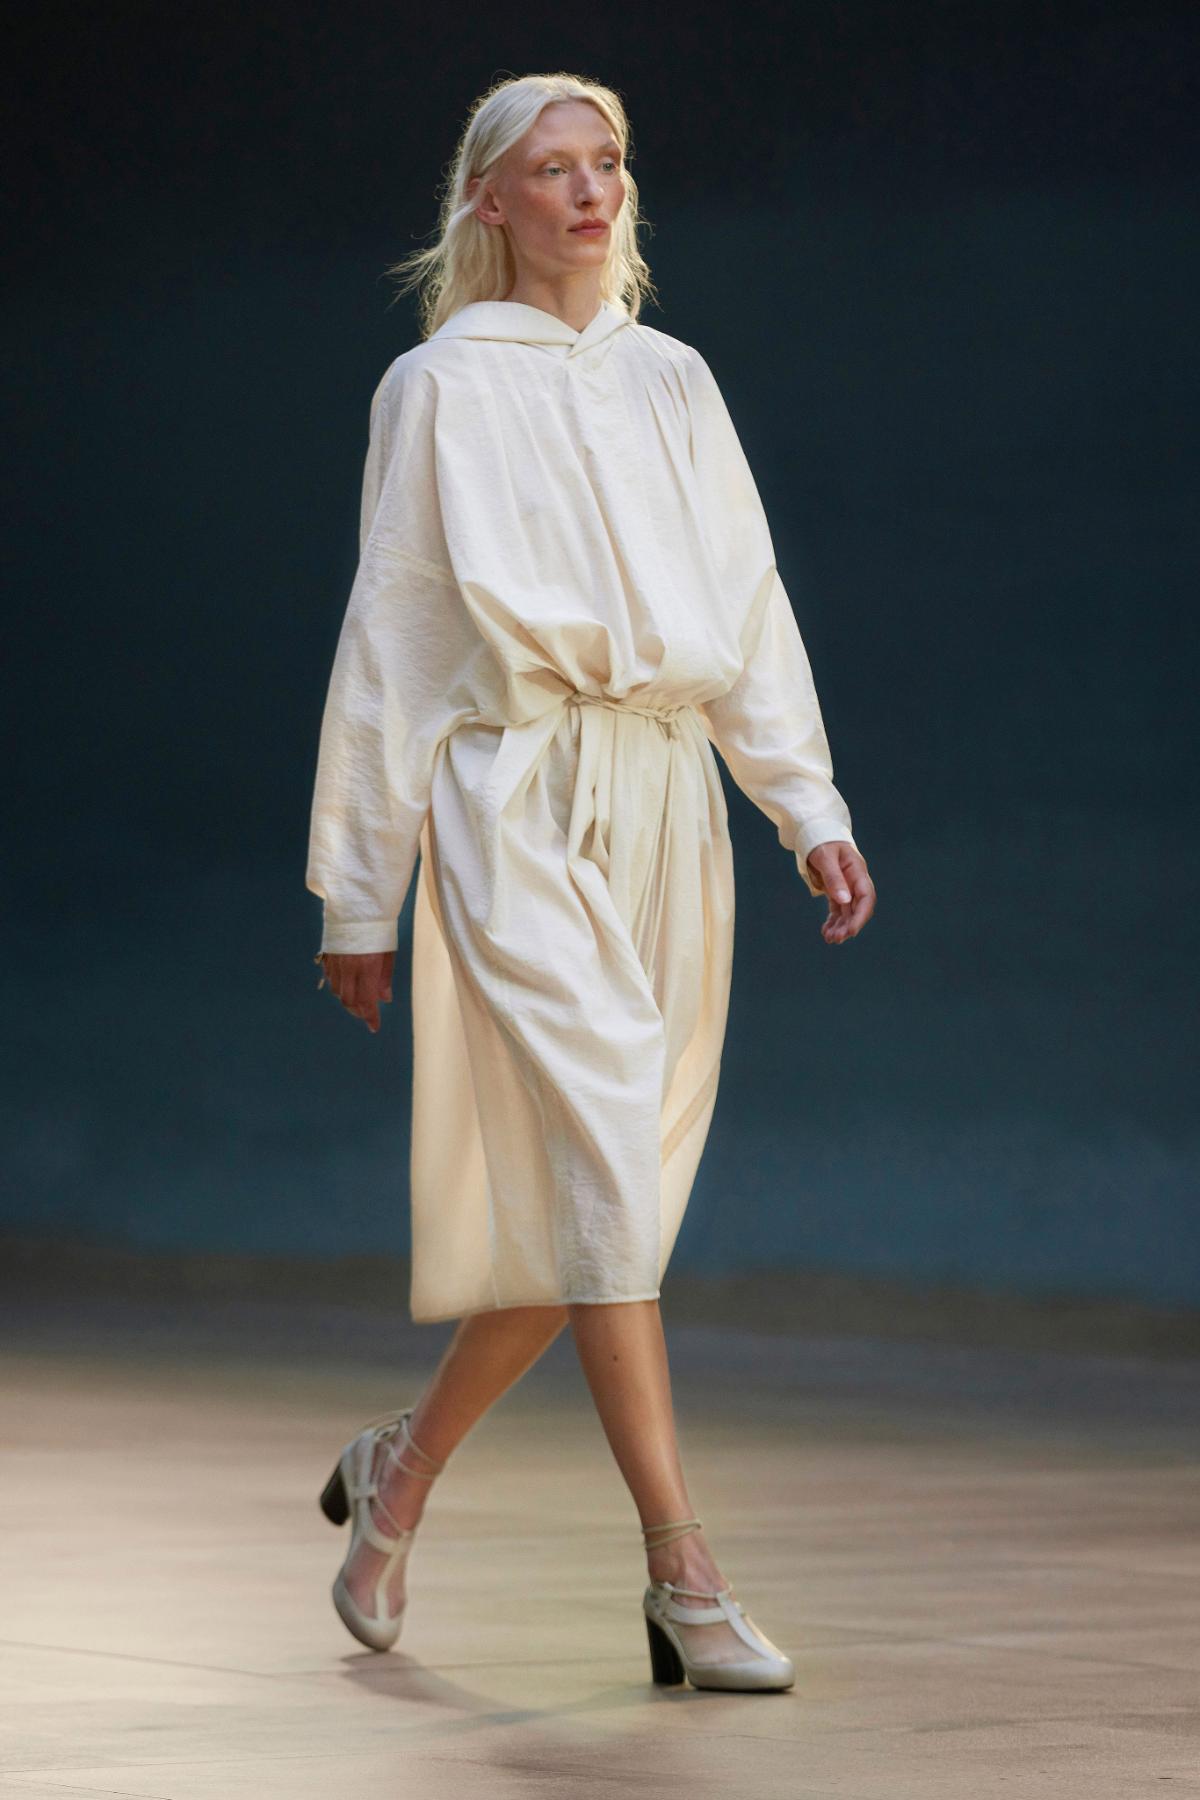 Maggie Maurer walks Lemaire Spring 2022 Runway Show in Paris photographed by Lena C. Emery